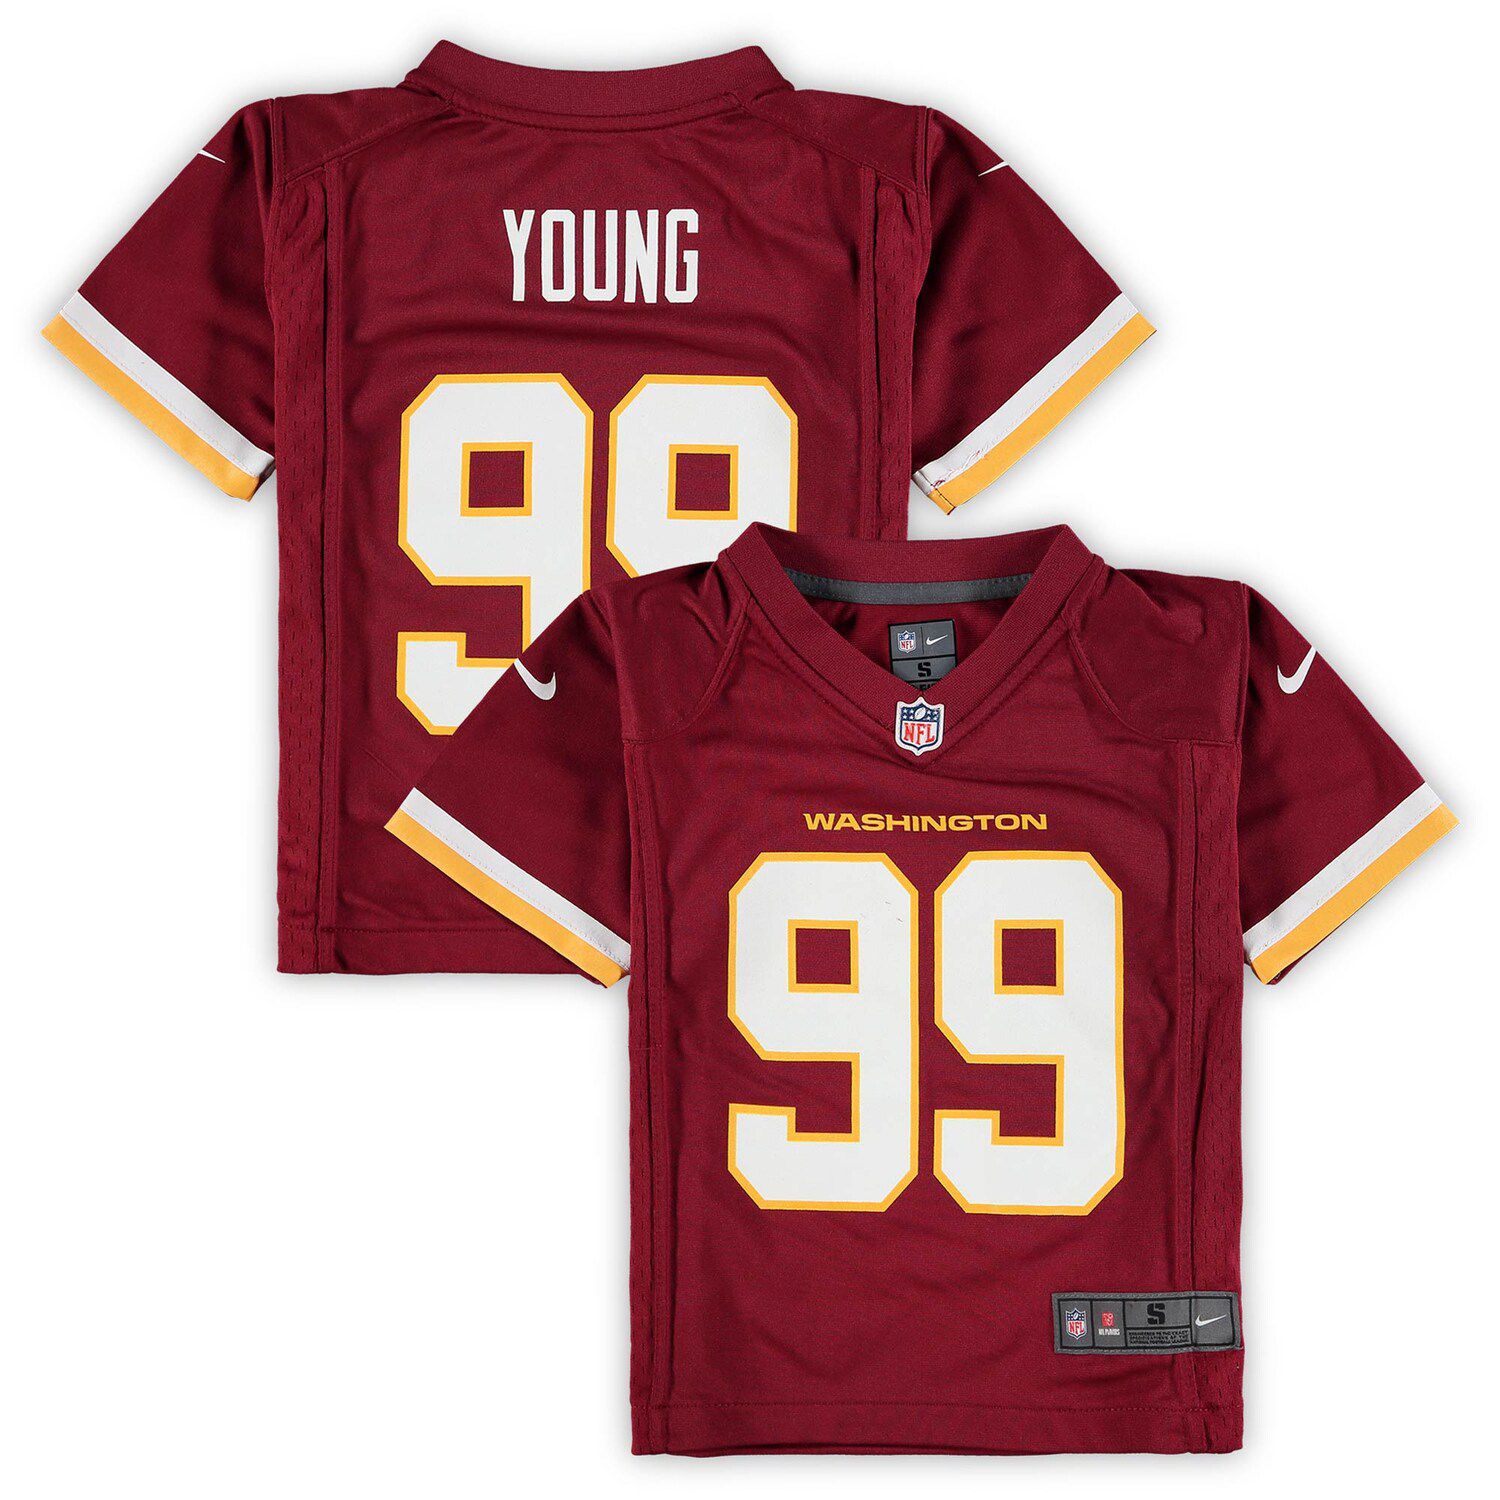 chase young jersey number